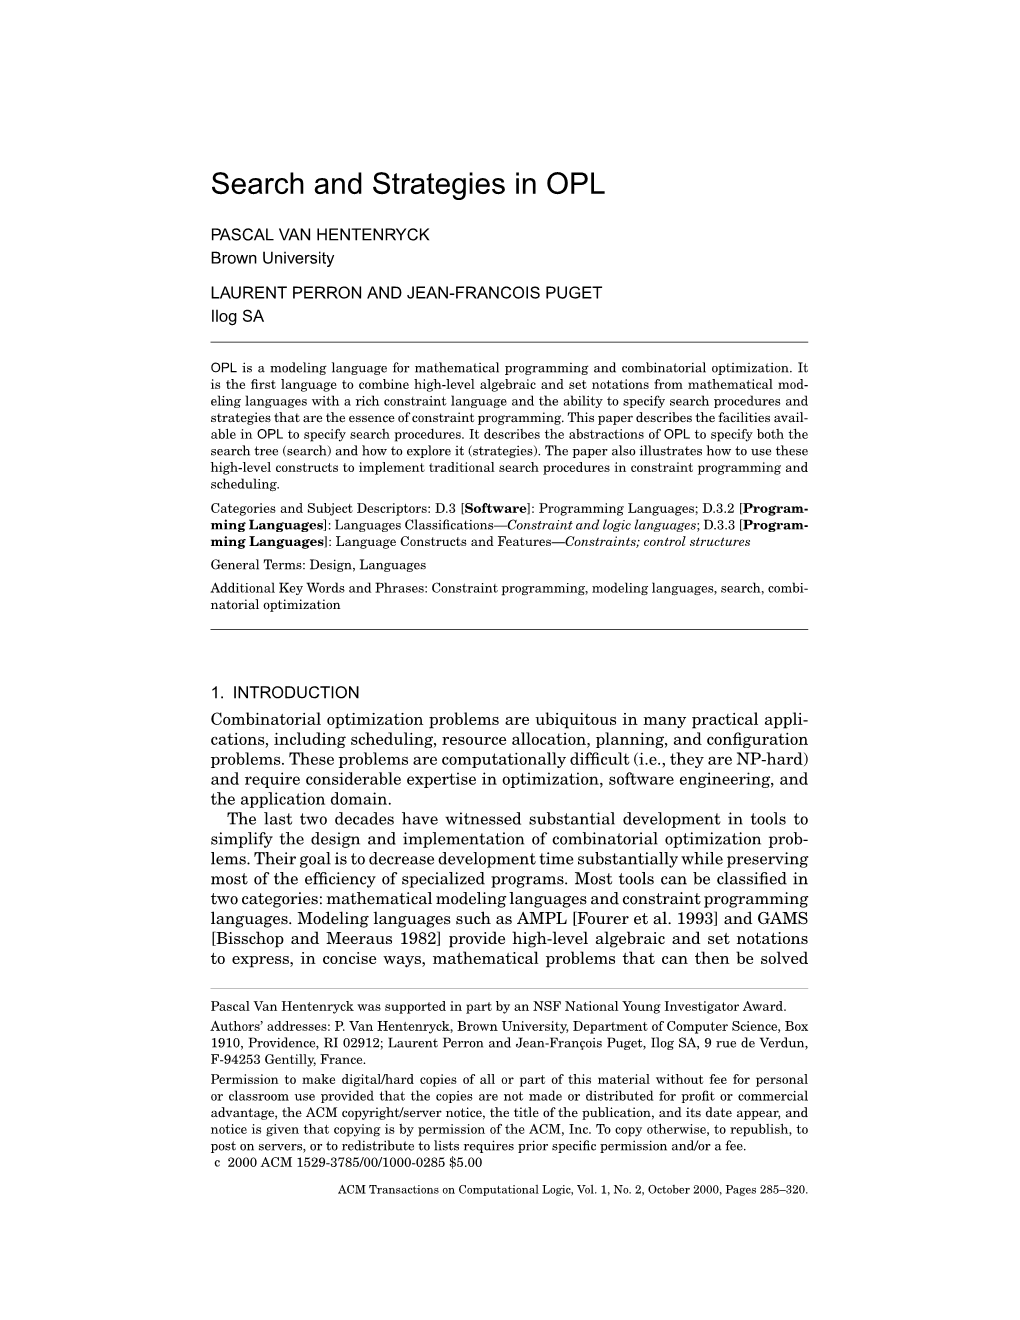 Search and Strategies in OPL